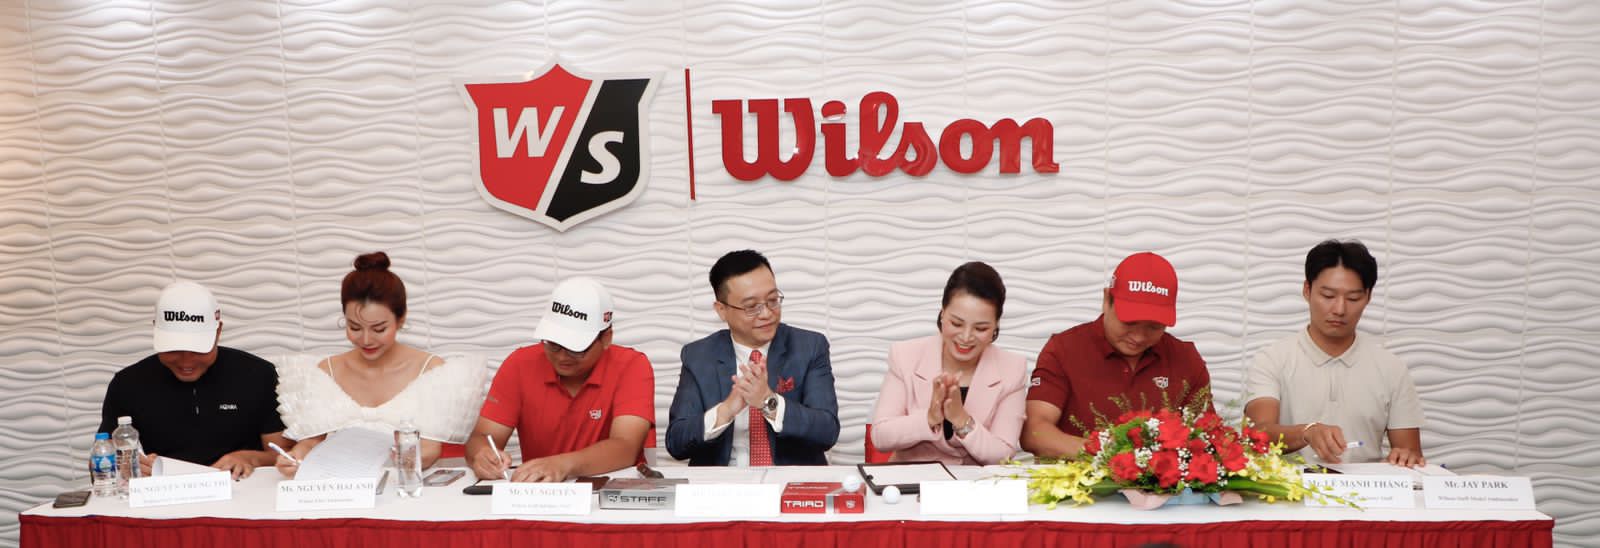 VTV6 360 The Thao: JG golf will join 6 brand ambassadors to bring the 'legacy' of 108 years of history to become a 'friendly' and popular golf brand in Vietnam.